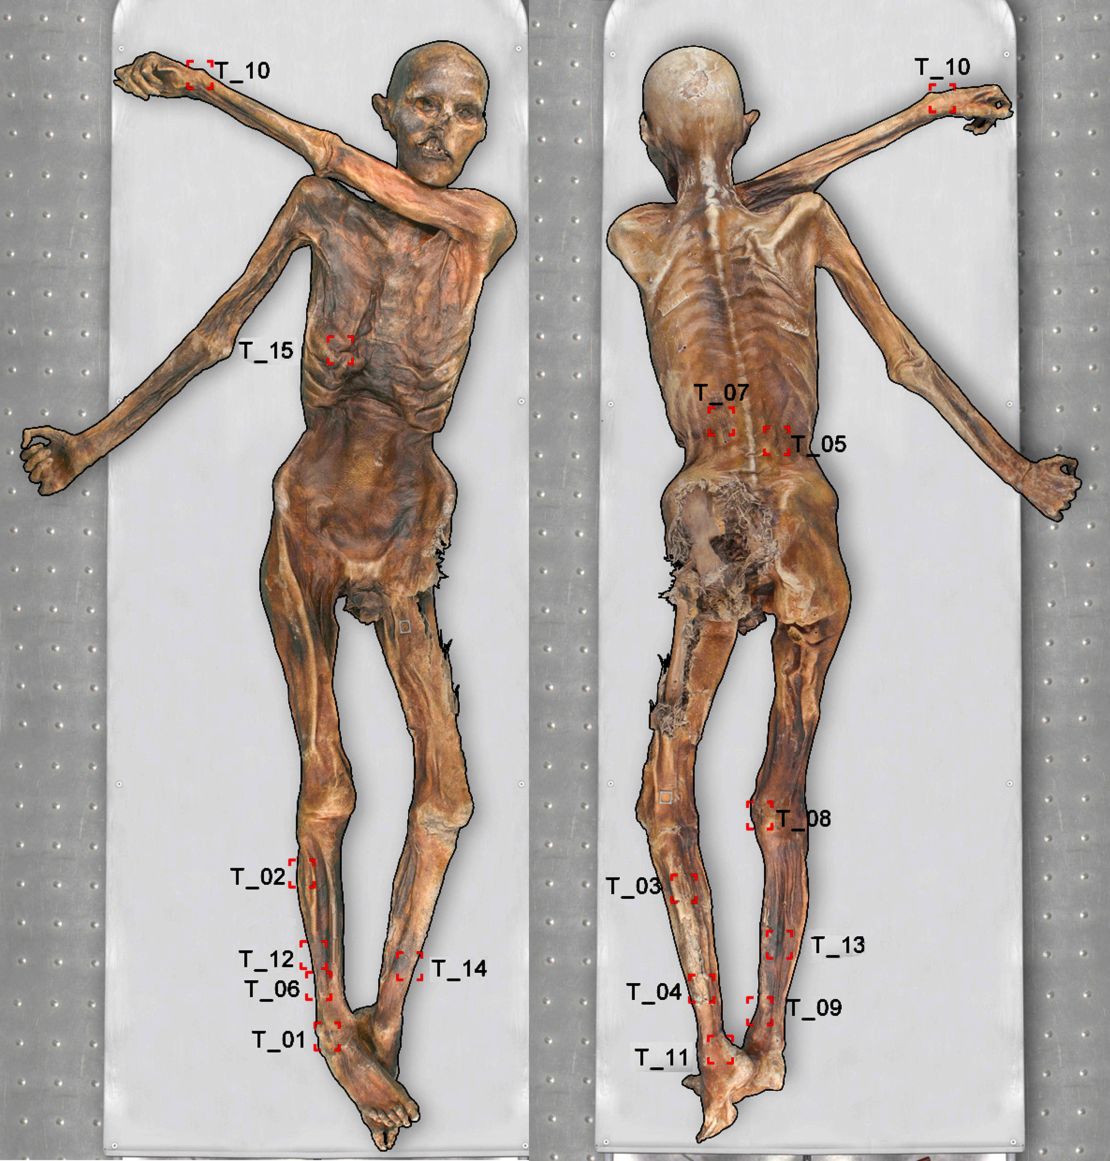 Ötzi had tattoos on several areas of his body.